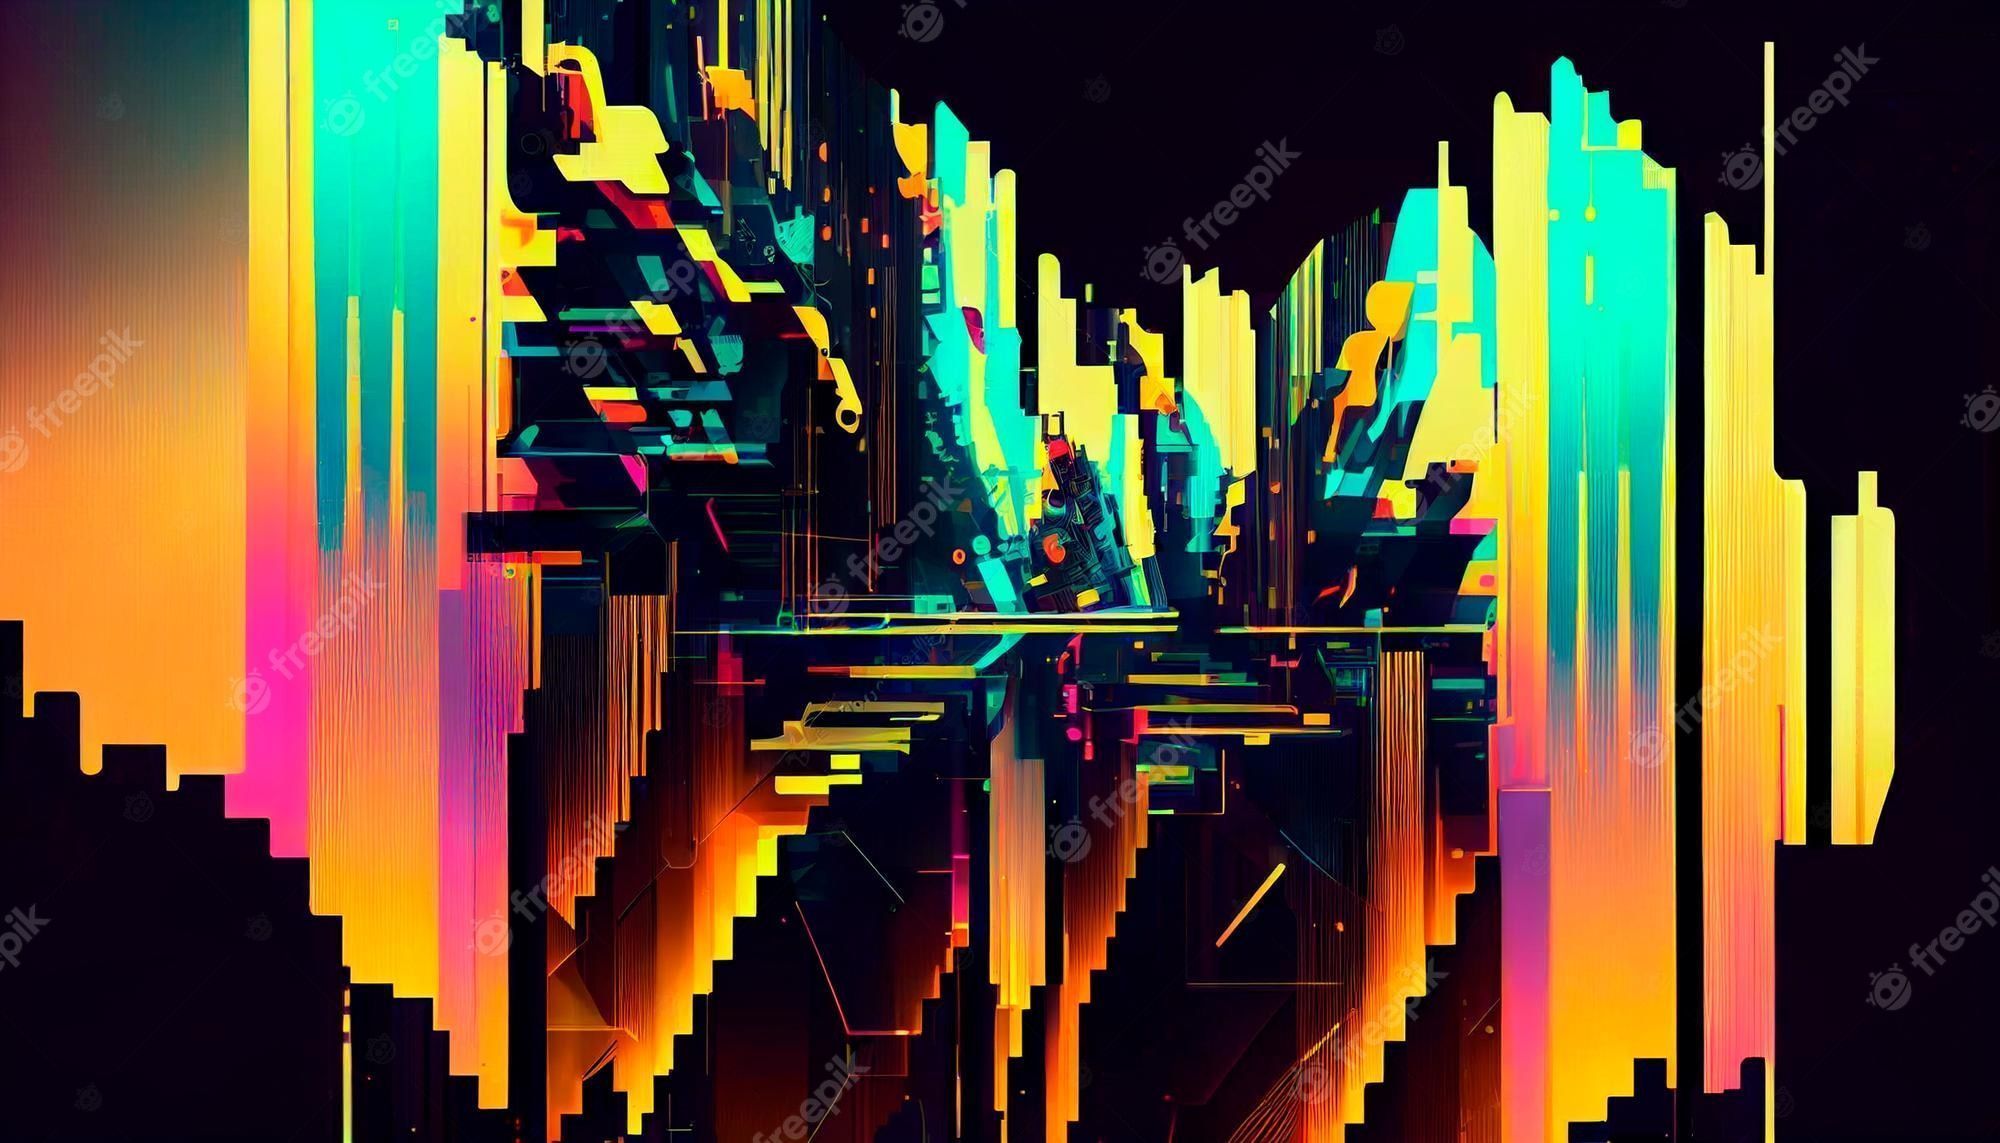 Digital illustration of a colorful city with tall buildings - Cyberpunk, technology